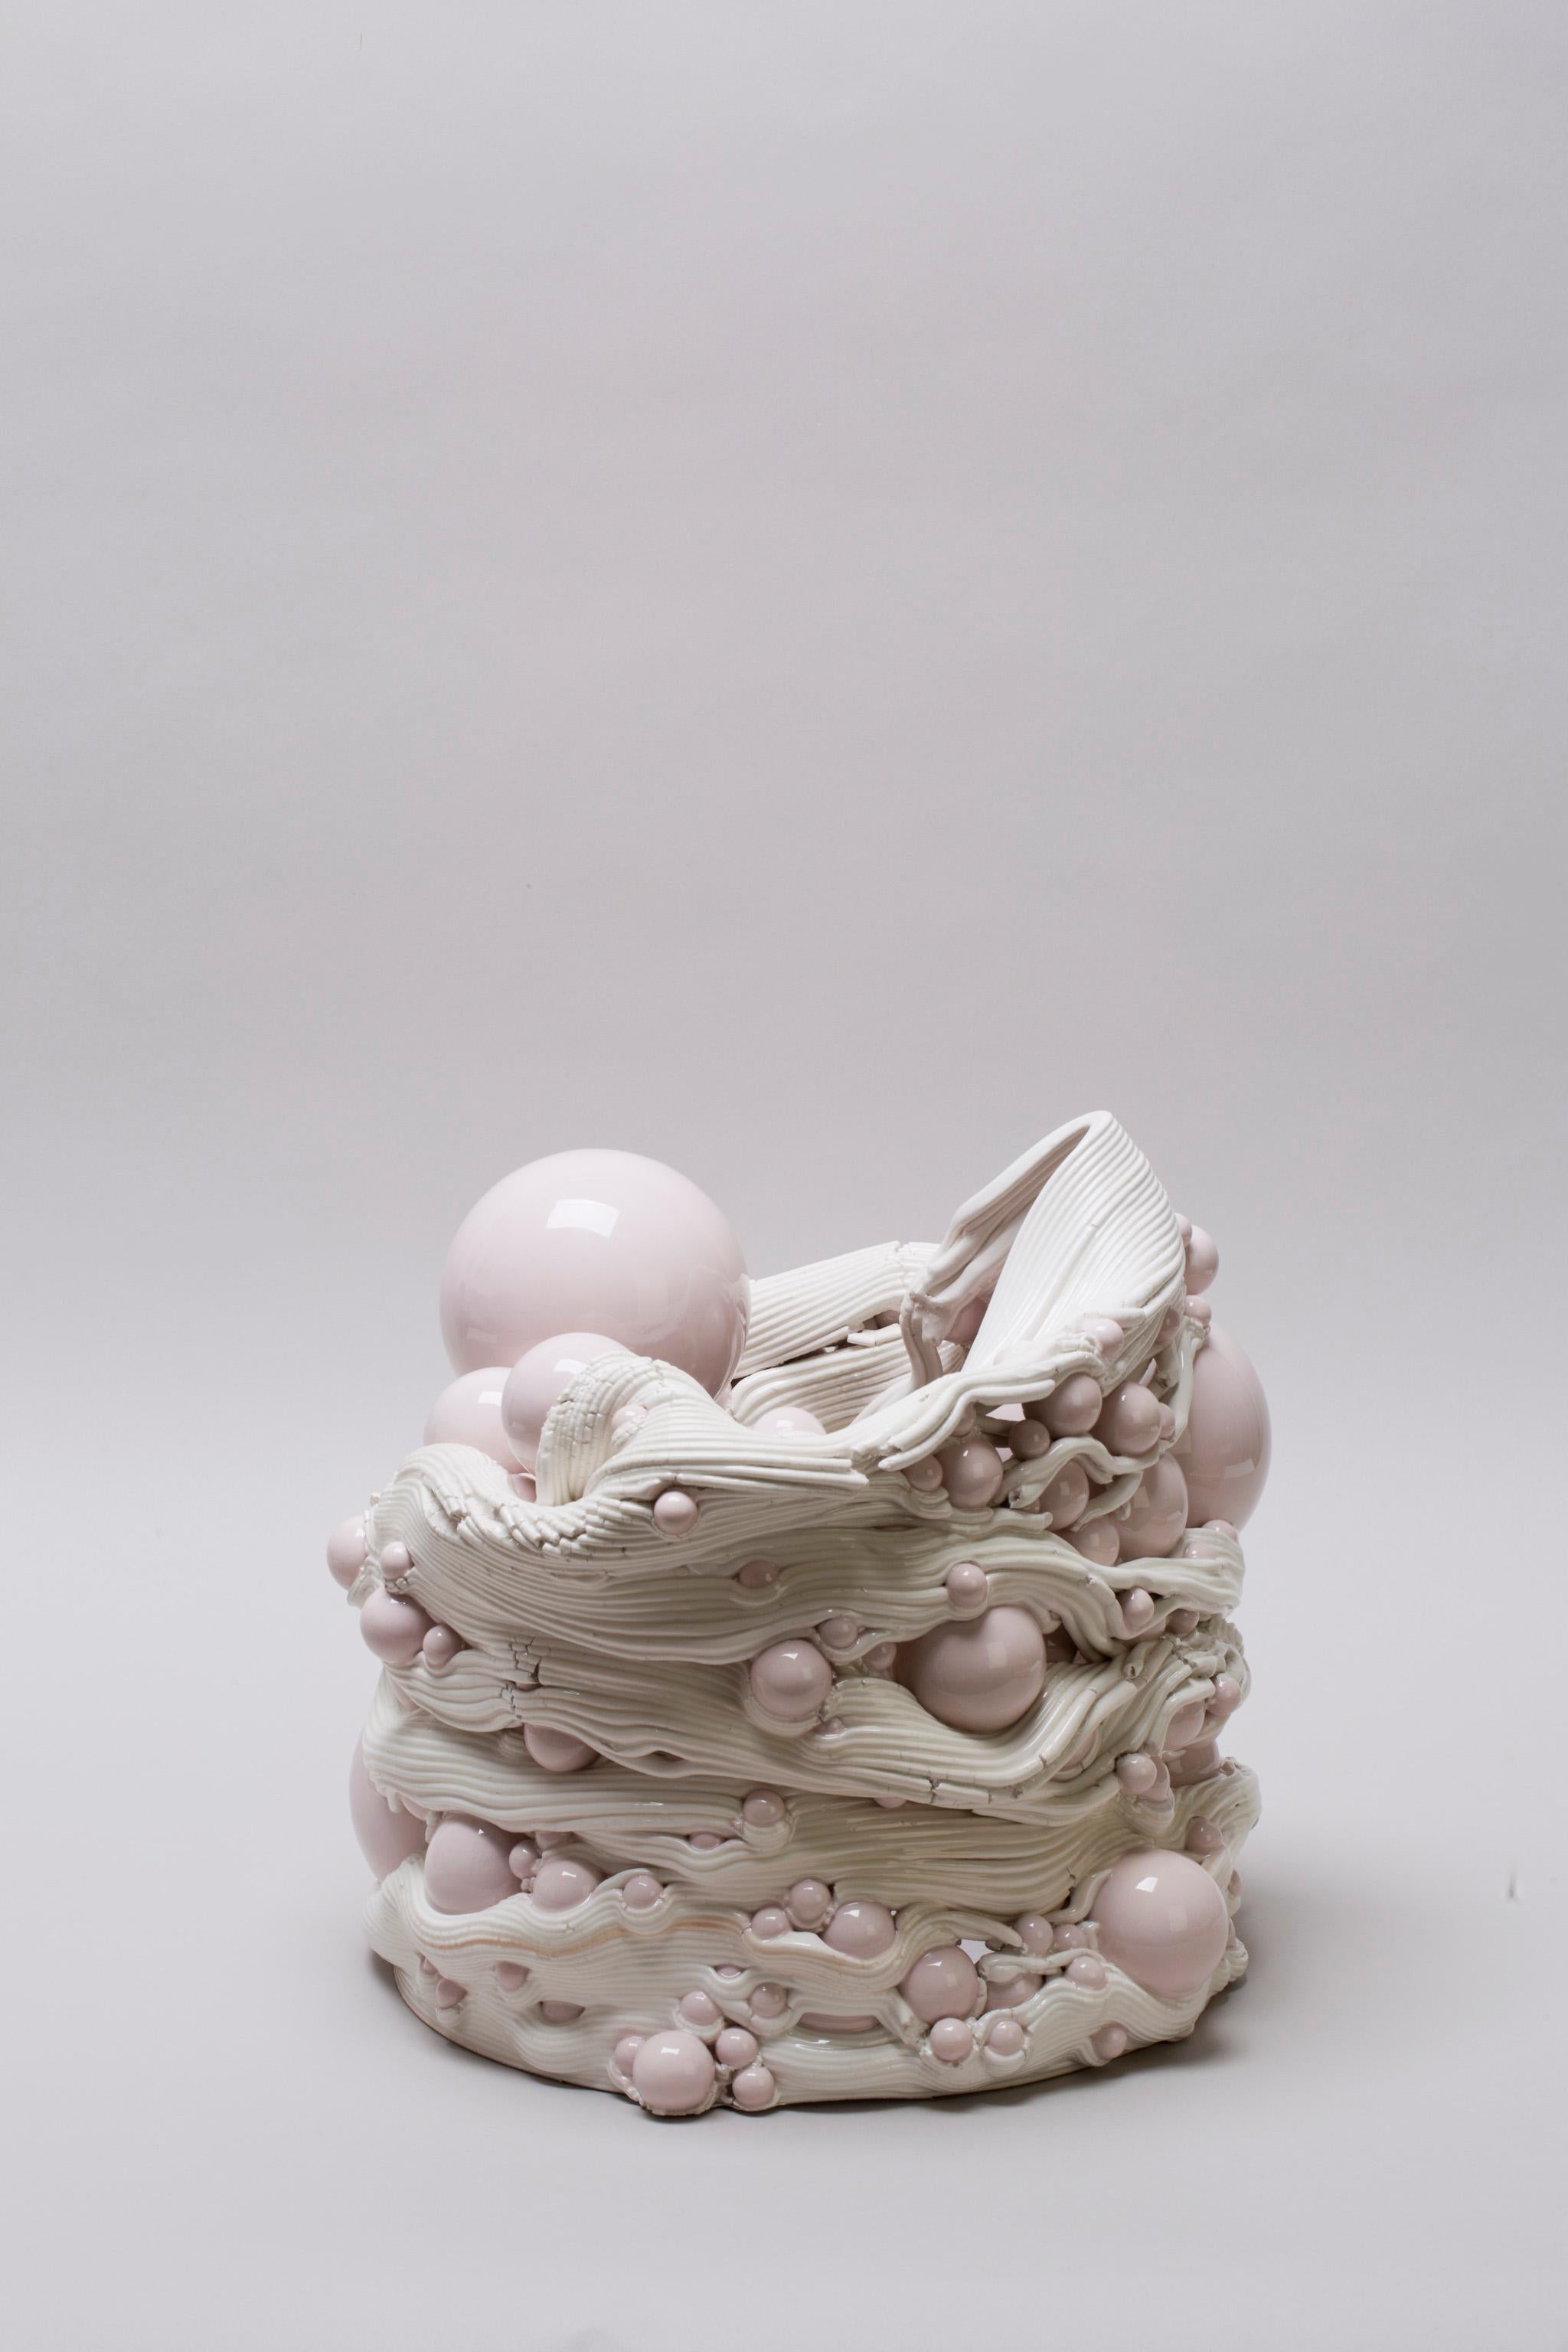 White & Pink Ceramic Sculptural Vase Italian Contemporary, 21st Century 3D Print In New Condition For Sale In London, GB